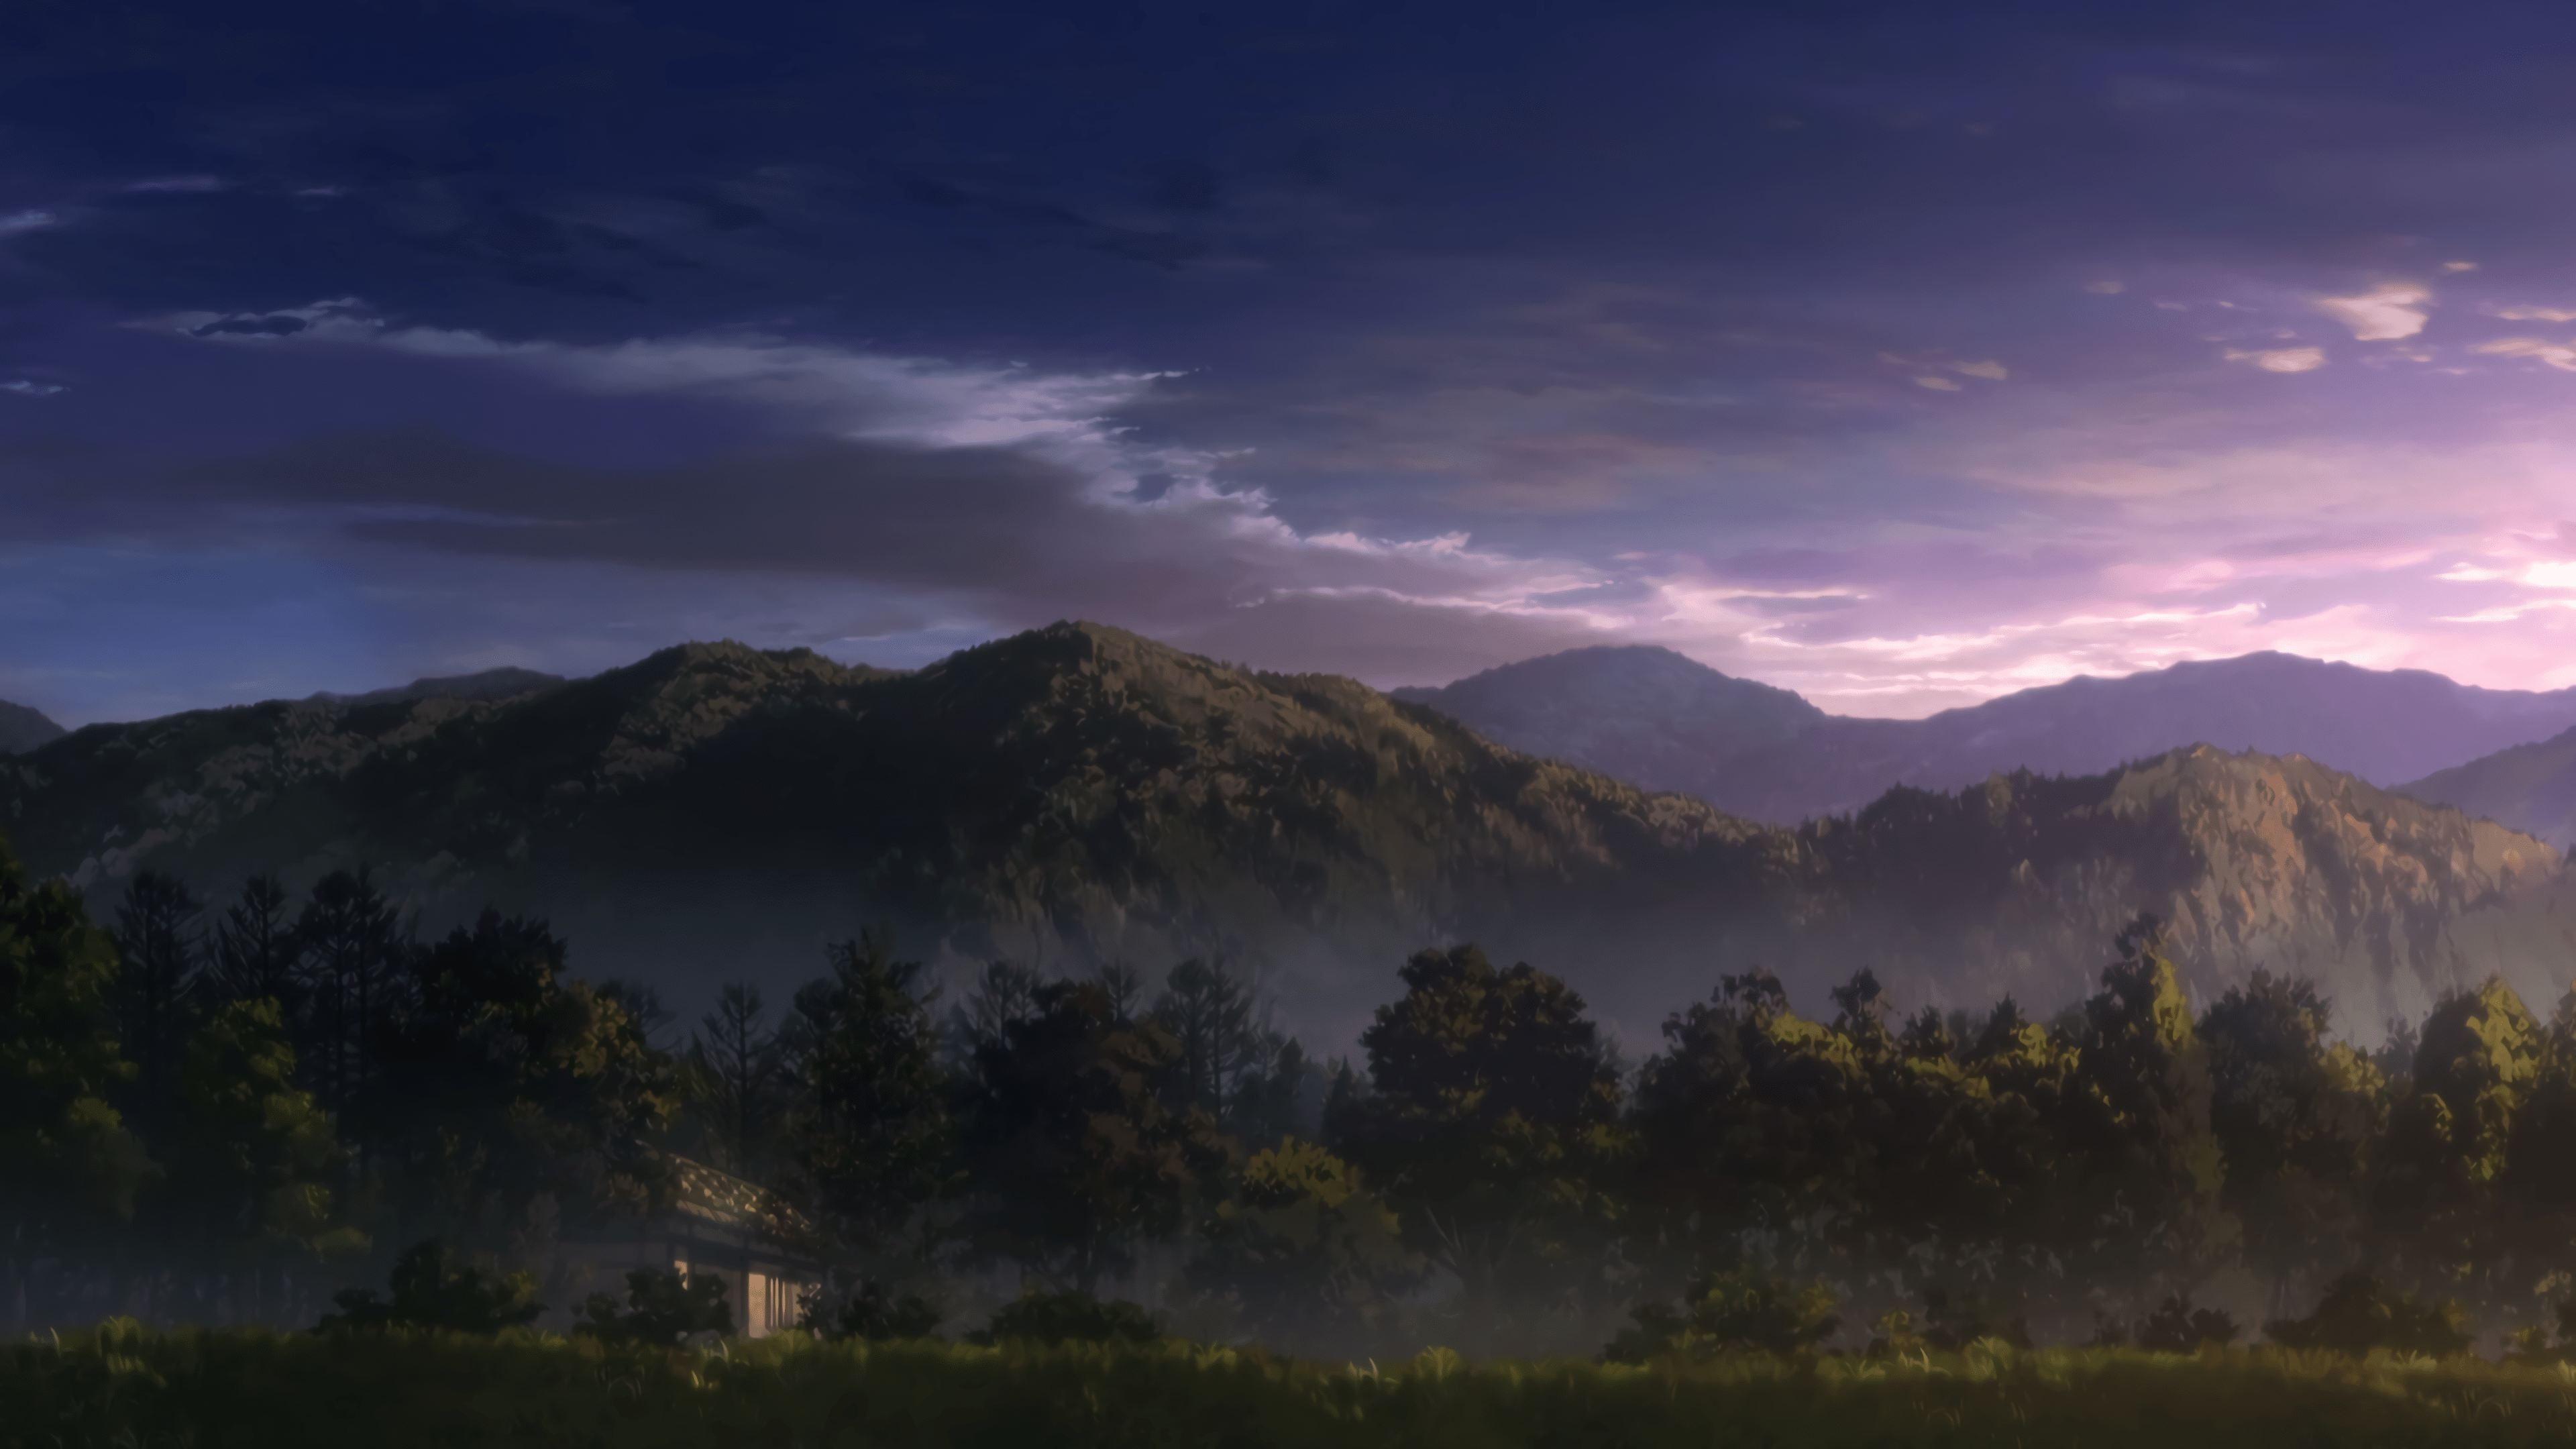 Anime Landscape Mountains Clouds Sky Trees Nature Wallpaper:3840x2160